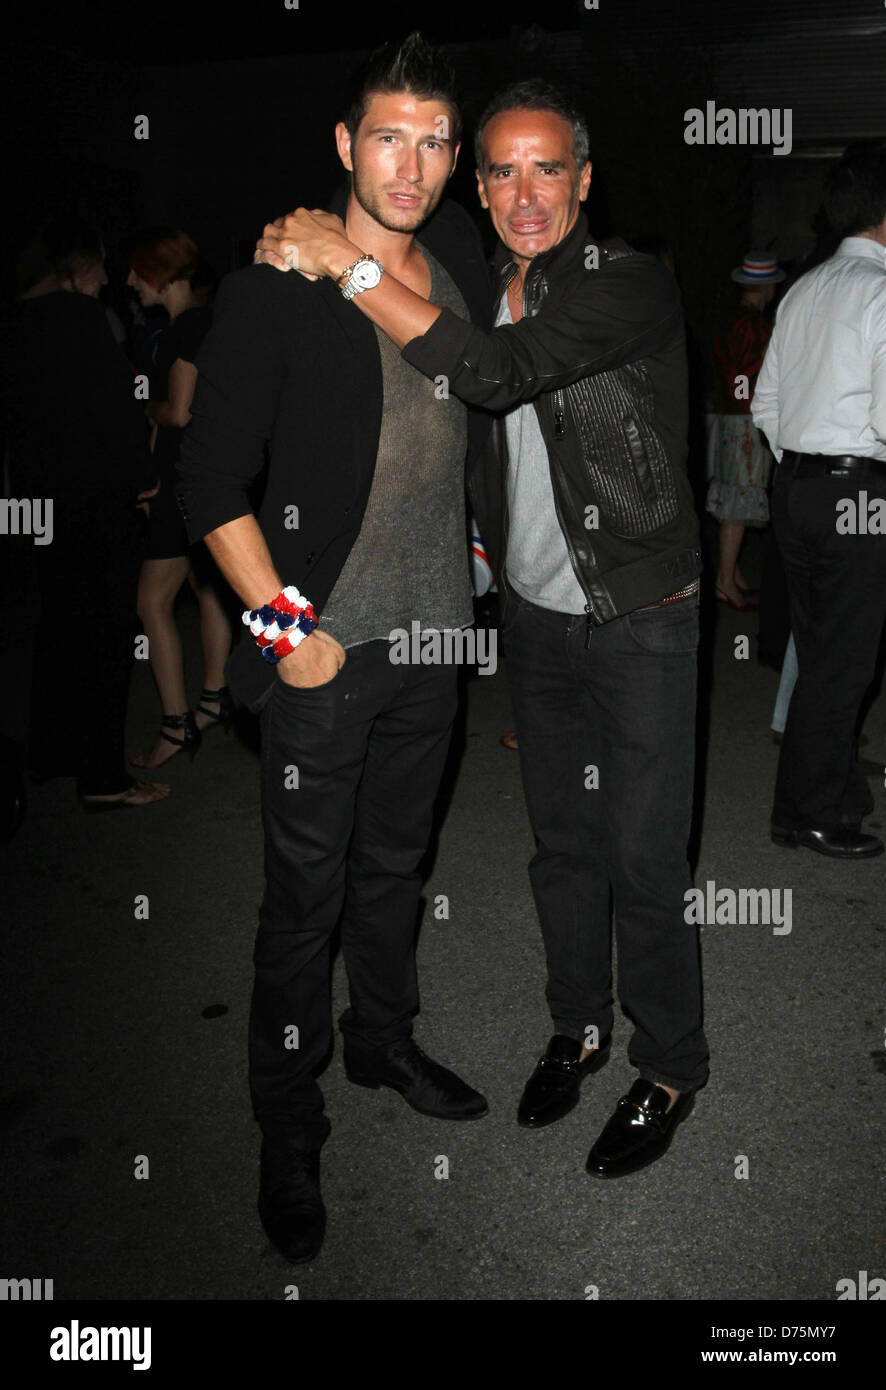 Greg de Laurent and Lloyd Klein French Independence Day 'Bastille Day ...